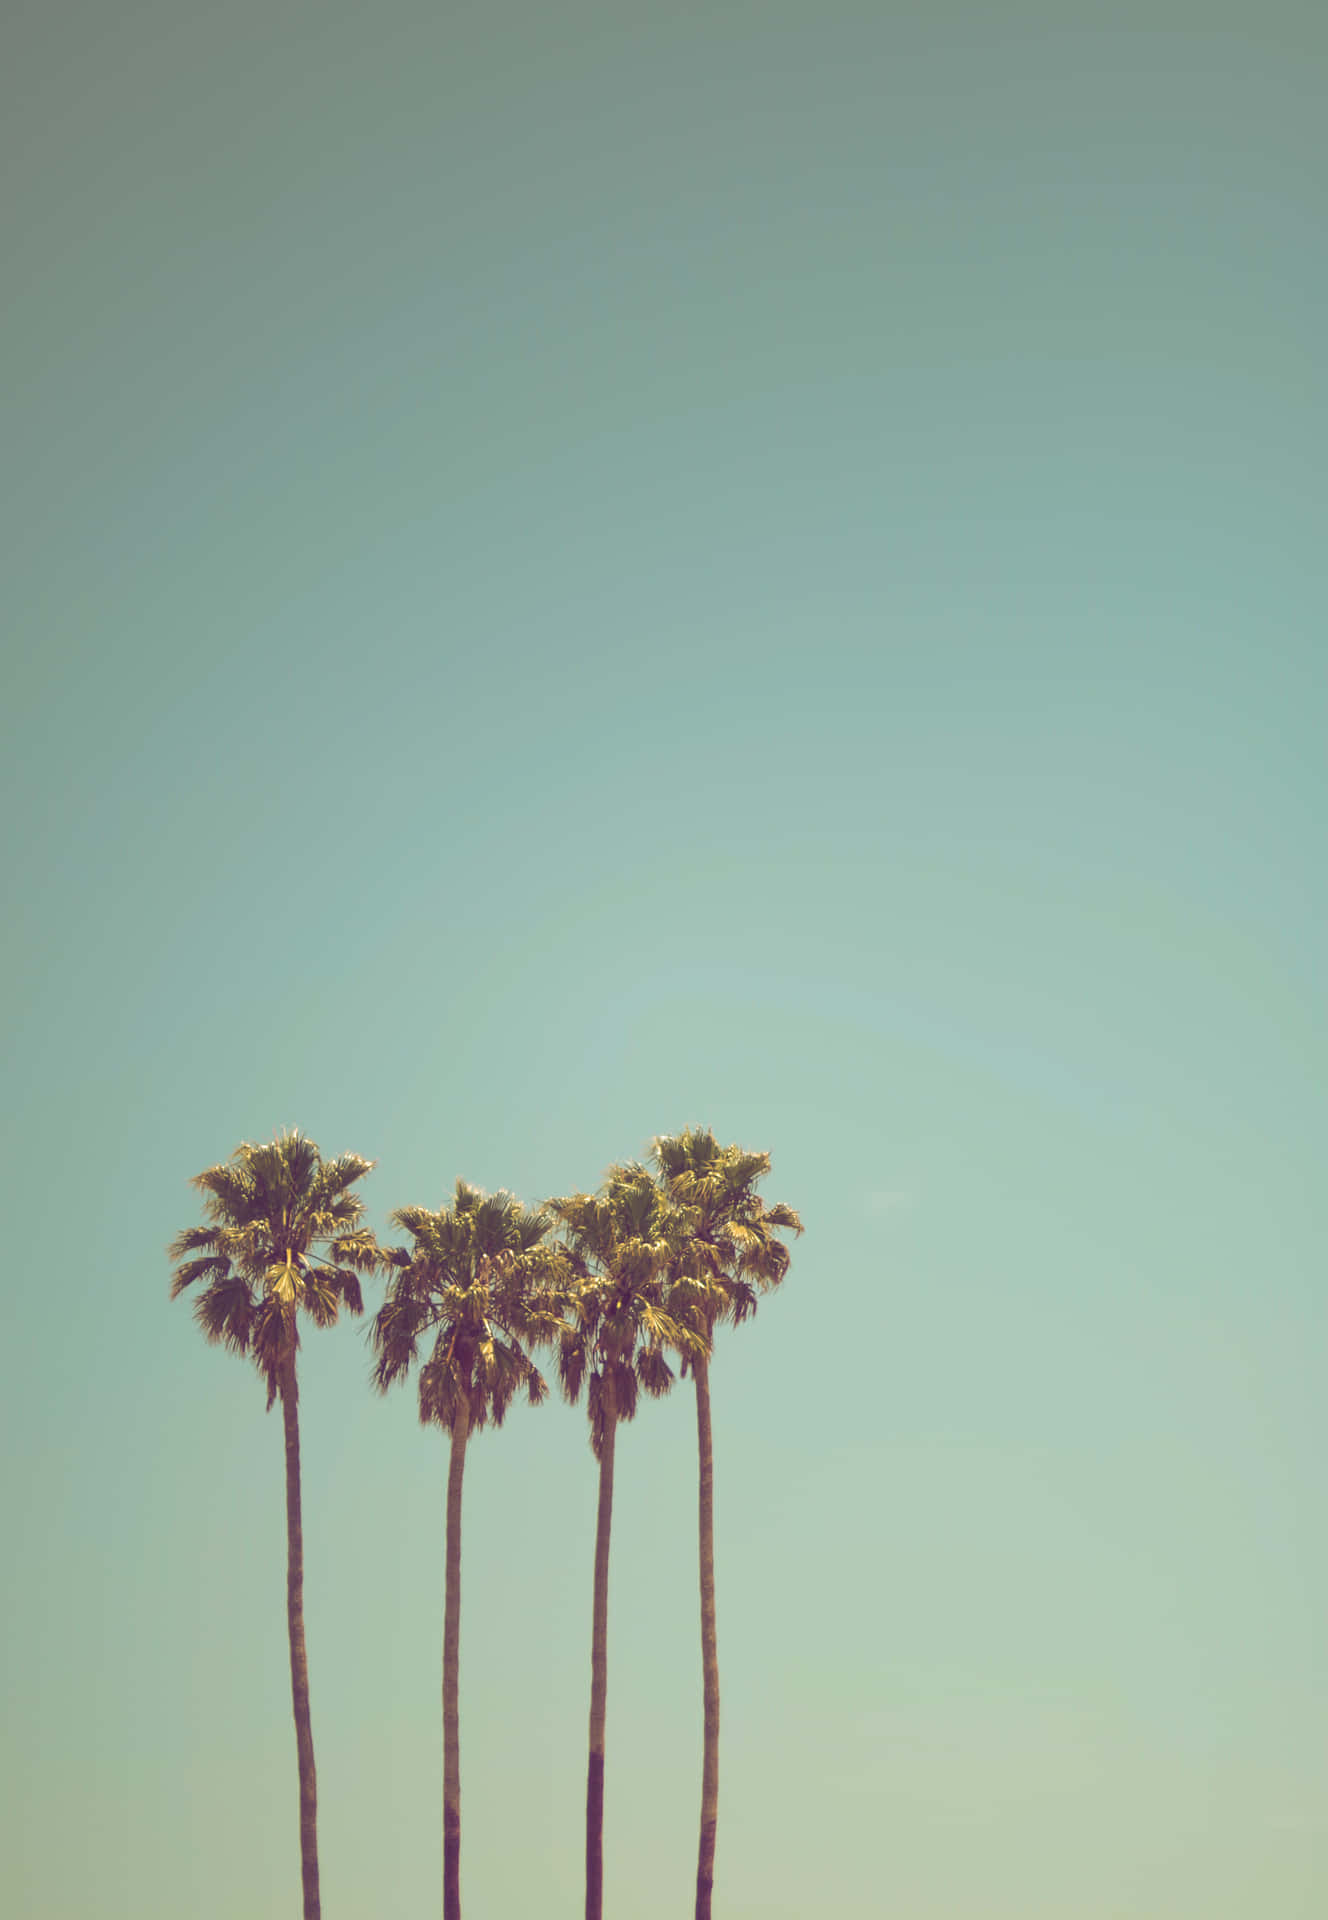 Getaway to paradise with a view of this cute palm tree! Wallpaper